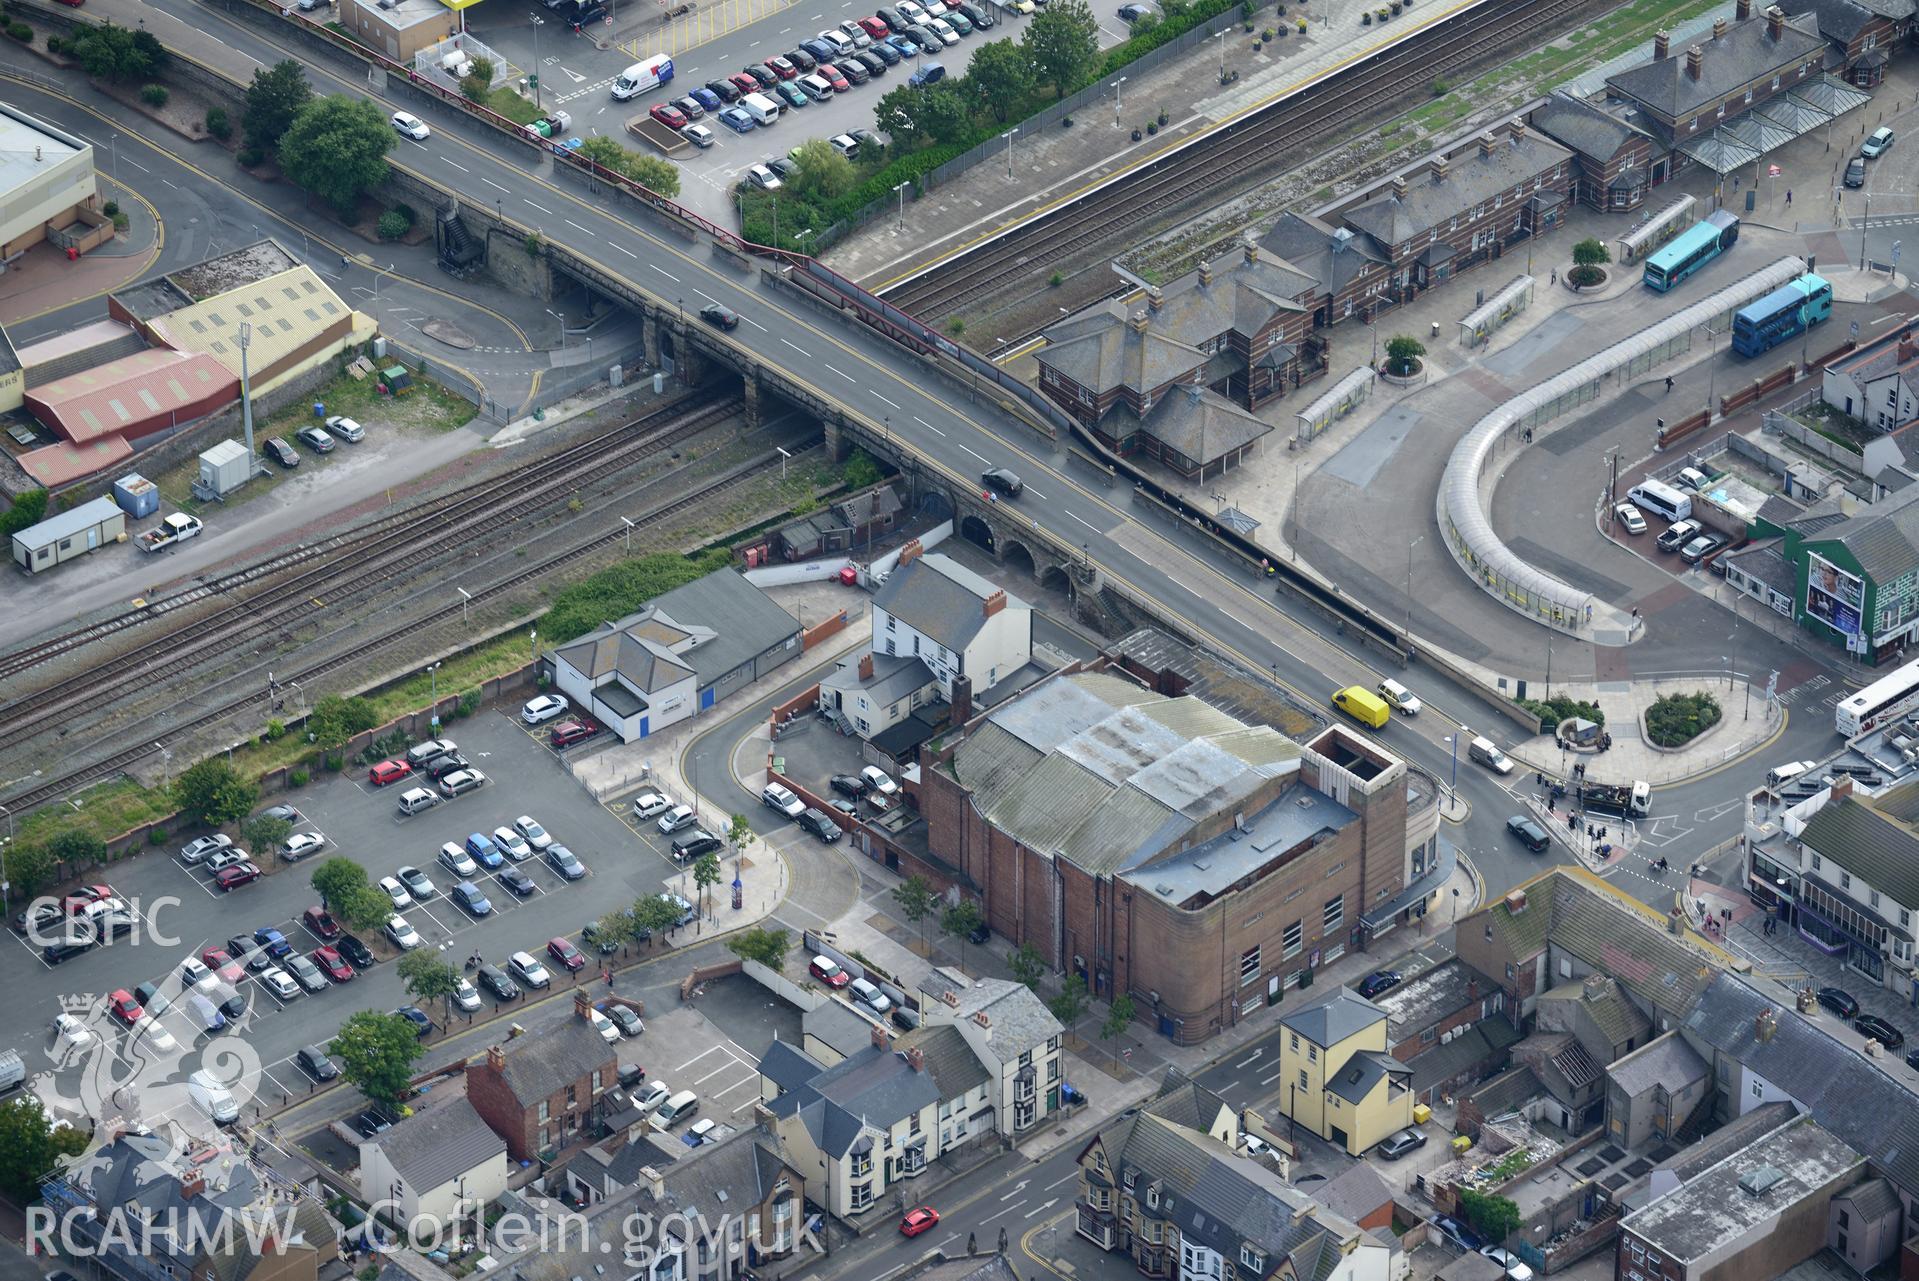 Odeon Cinema, Rhyl. Oblique aerial photograph taken during the Royal Commission's programme of archaeological aerial reconnaissance by Toby Driver on 11th September 2015.